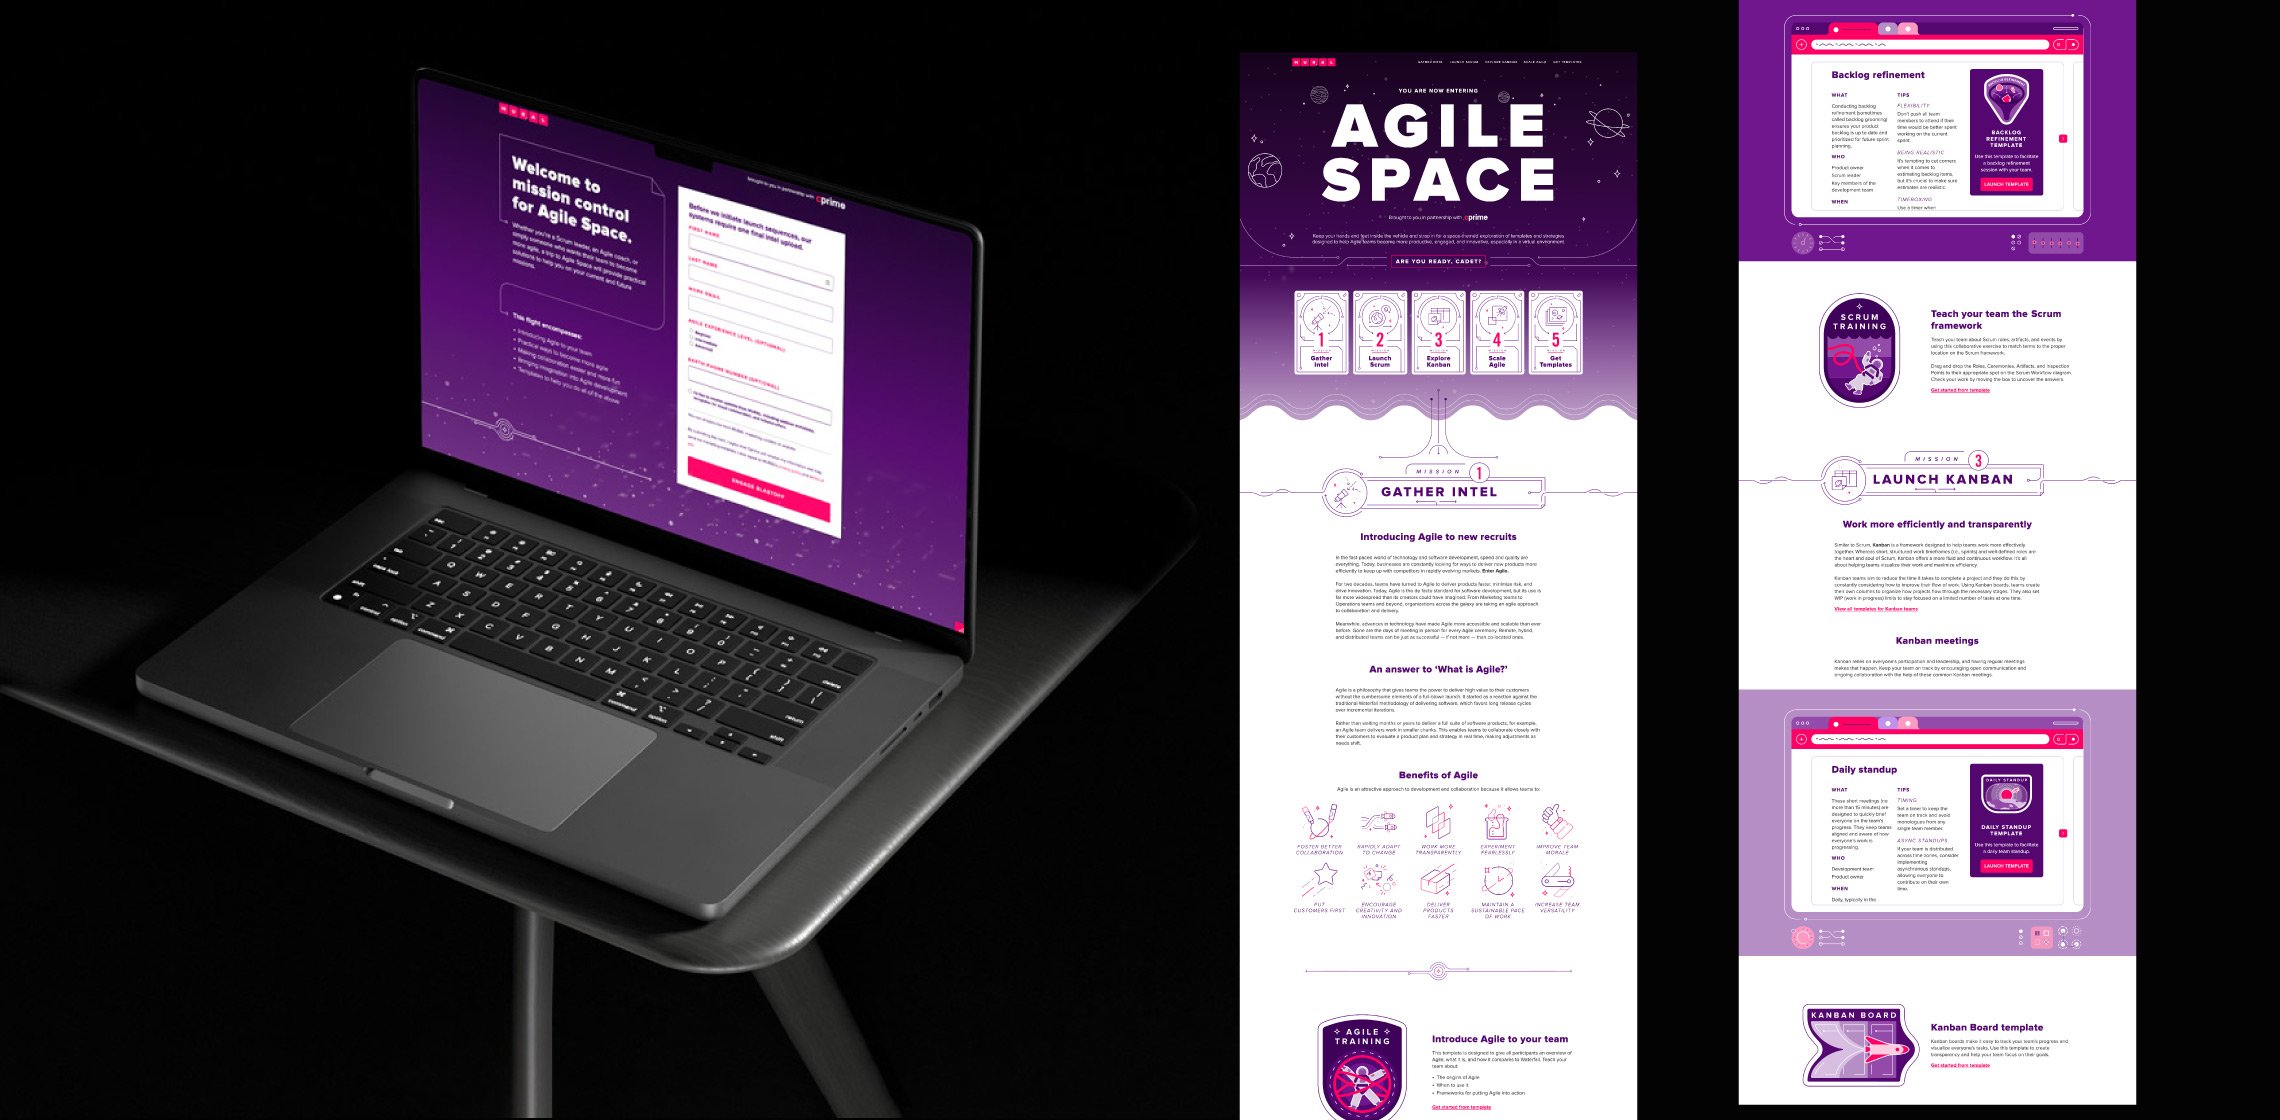 2 images side by side on black: at right, a gated landing page with a form and purple background on a laptop; at right, screenshots from a space-themed website detailing agile methodologies and practices with space imagery